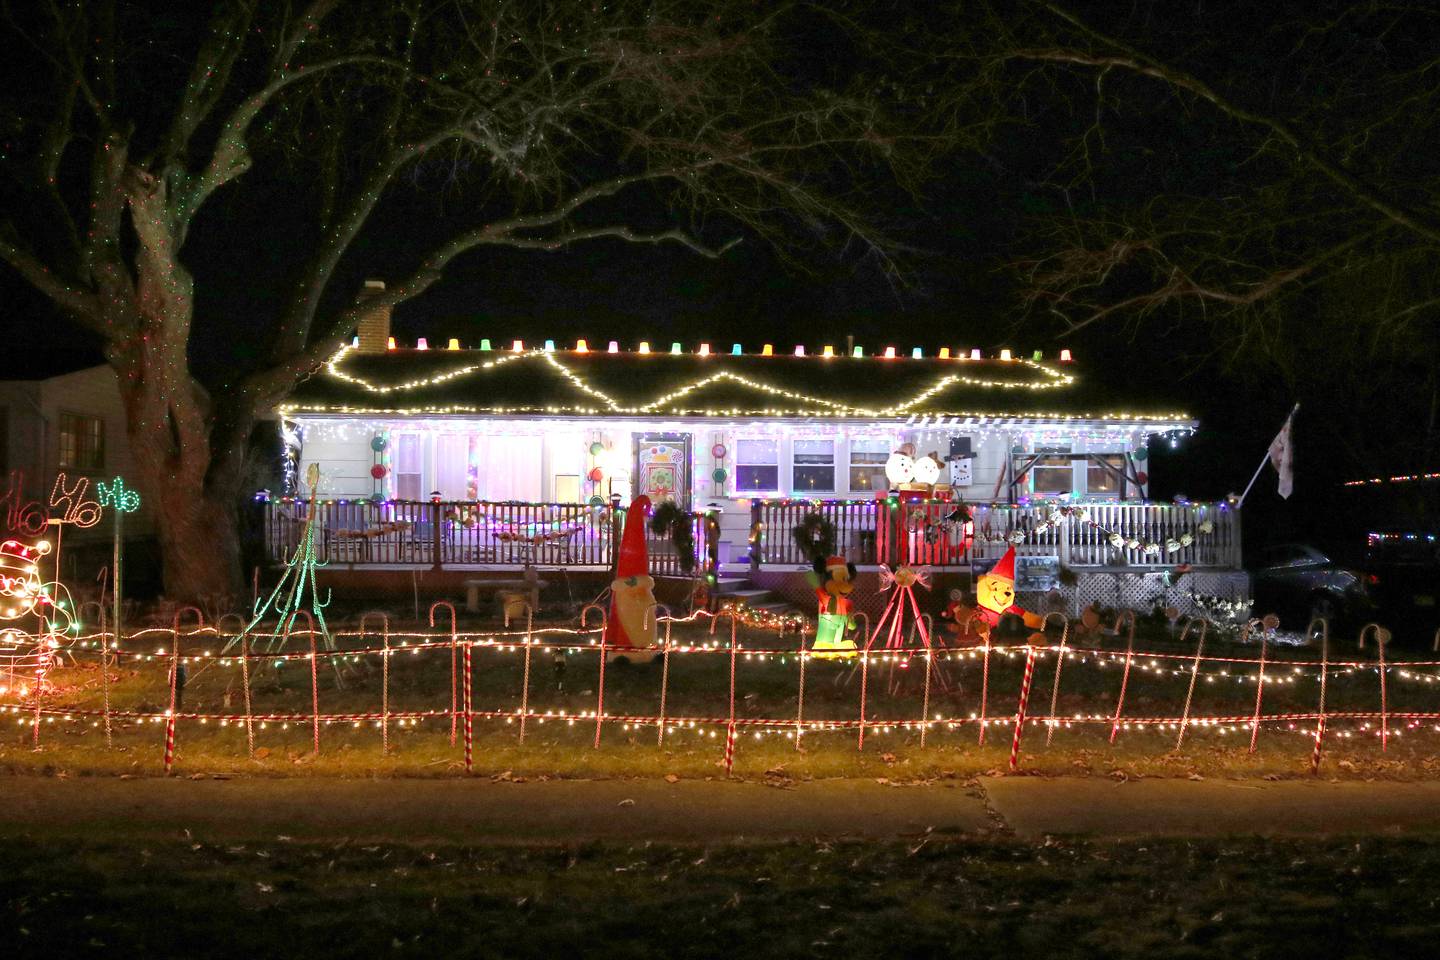 Many homes in DeKalb County were all decked out for the holidays like this one at 215 Gayle Avenue in DeKalb which was one of the award winners in the DeKalb Park District's Holiday House Decorating Contest.